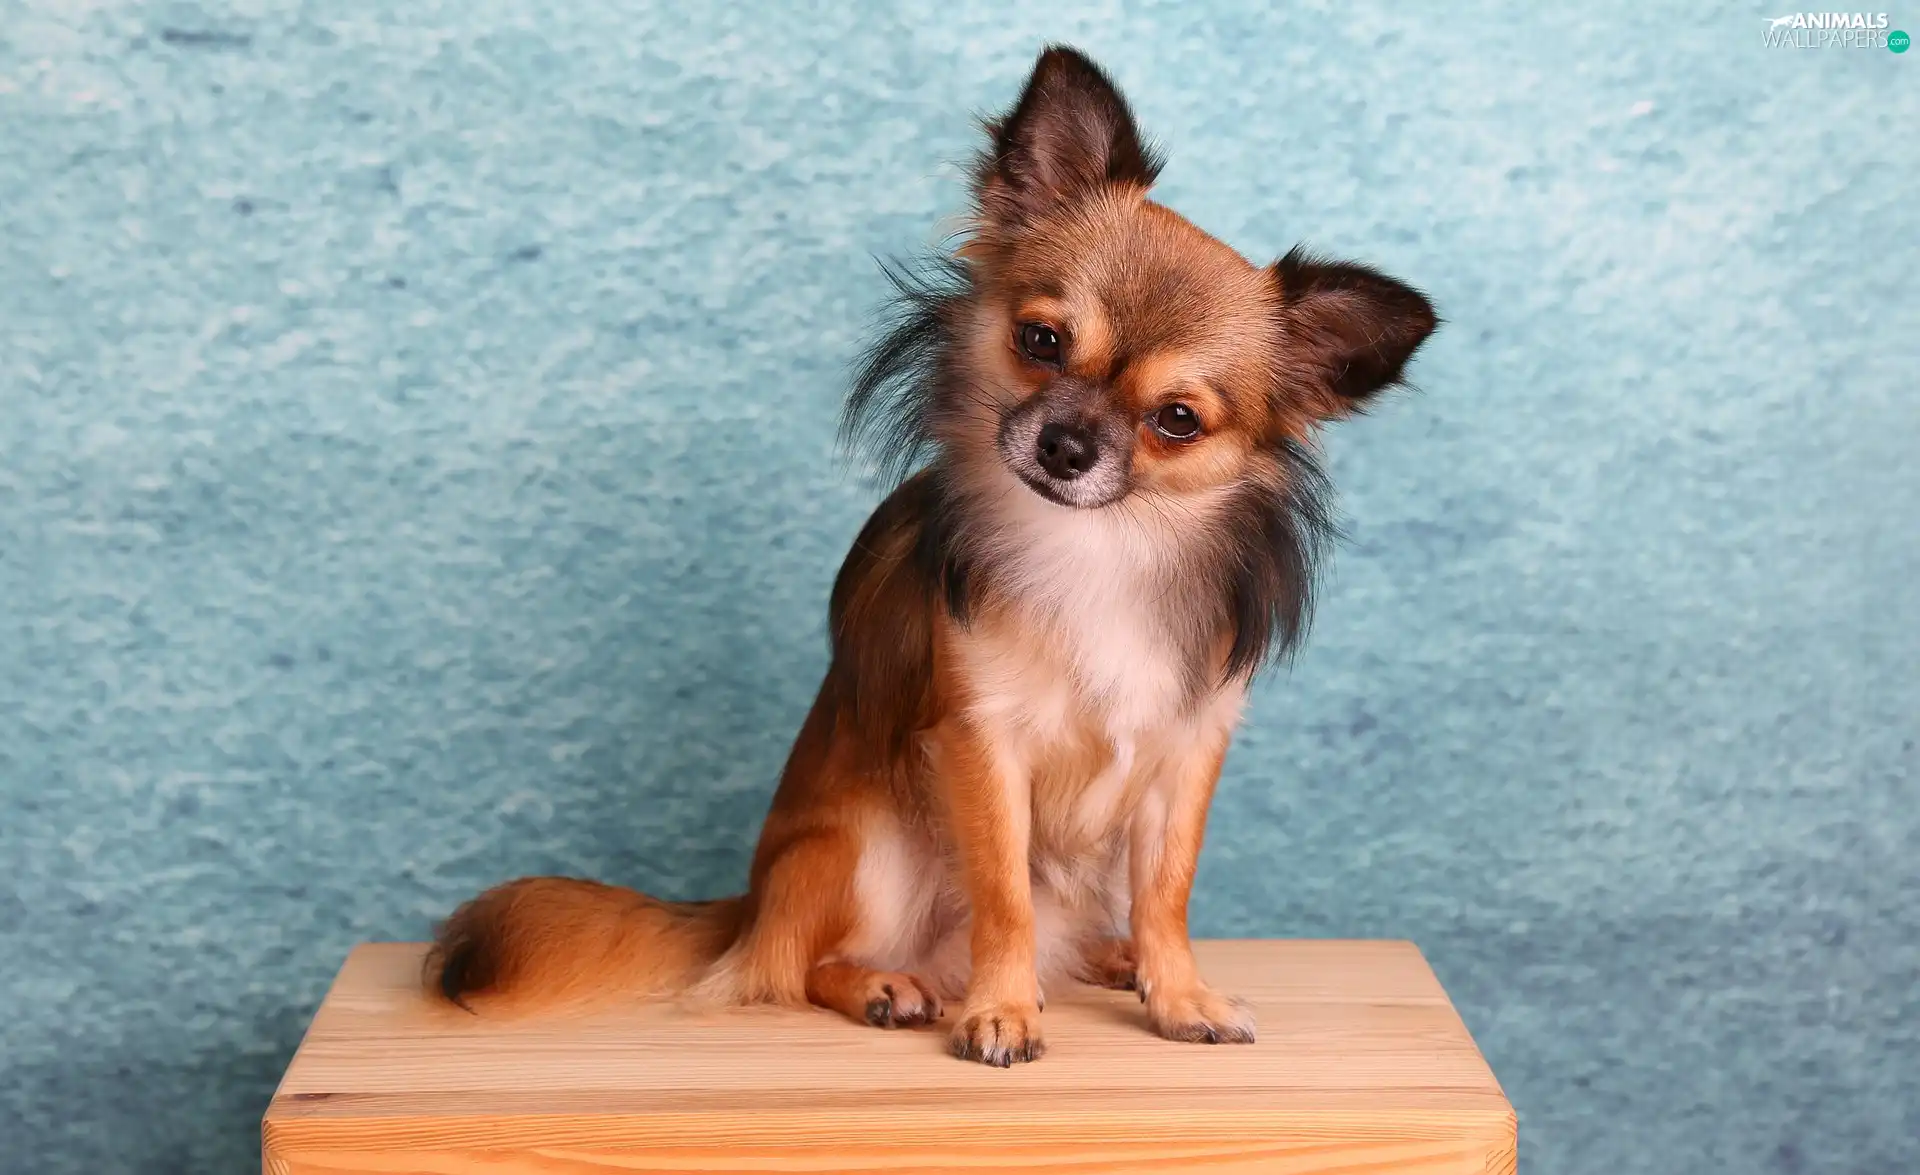 Long-haired Chihuahua, doggy